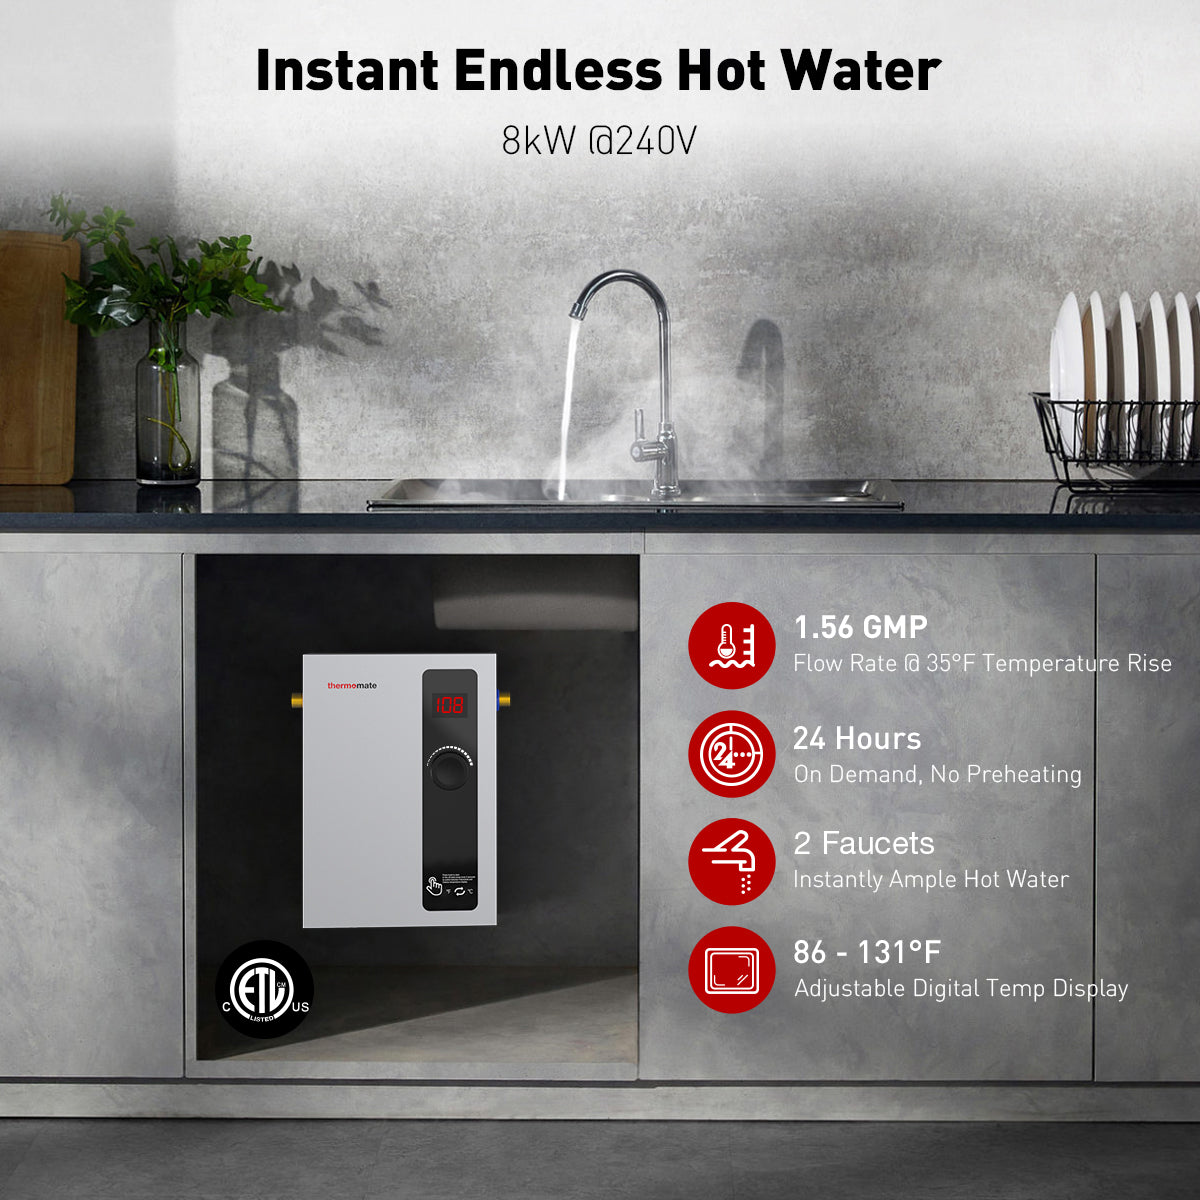 Instant Endless Hot Water | Thermomate